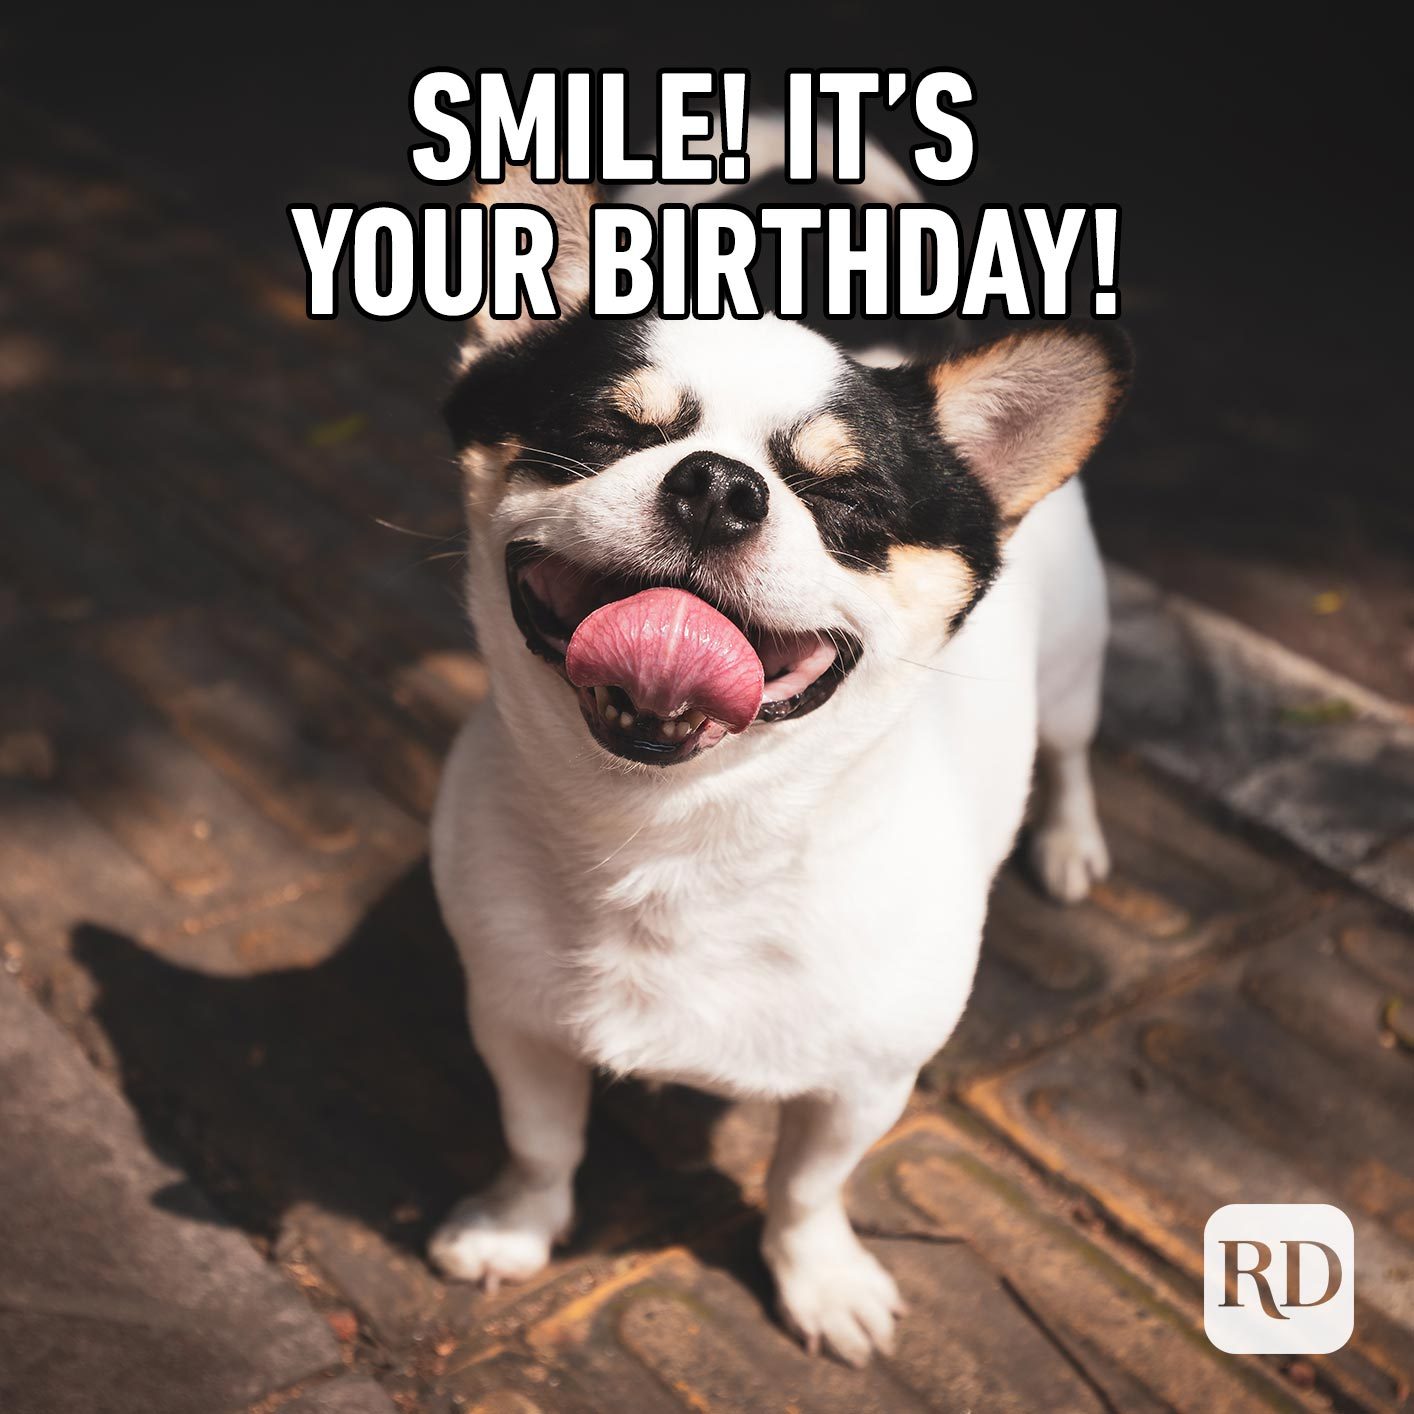 Happy Birthday Images For Her Free Gif Happy Birthday Meme Images ...